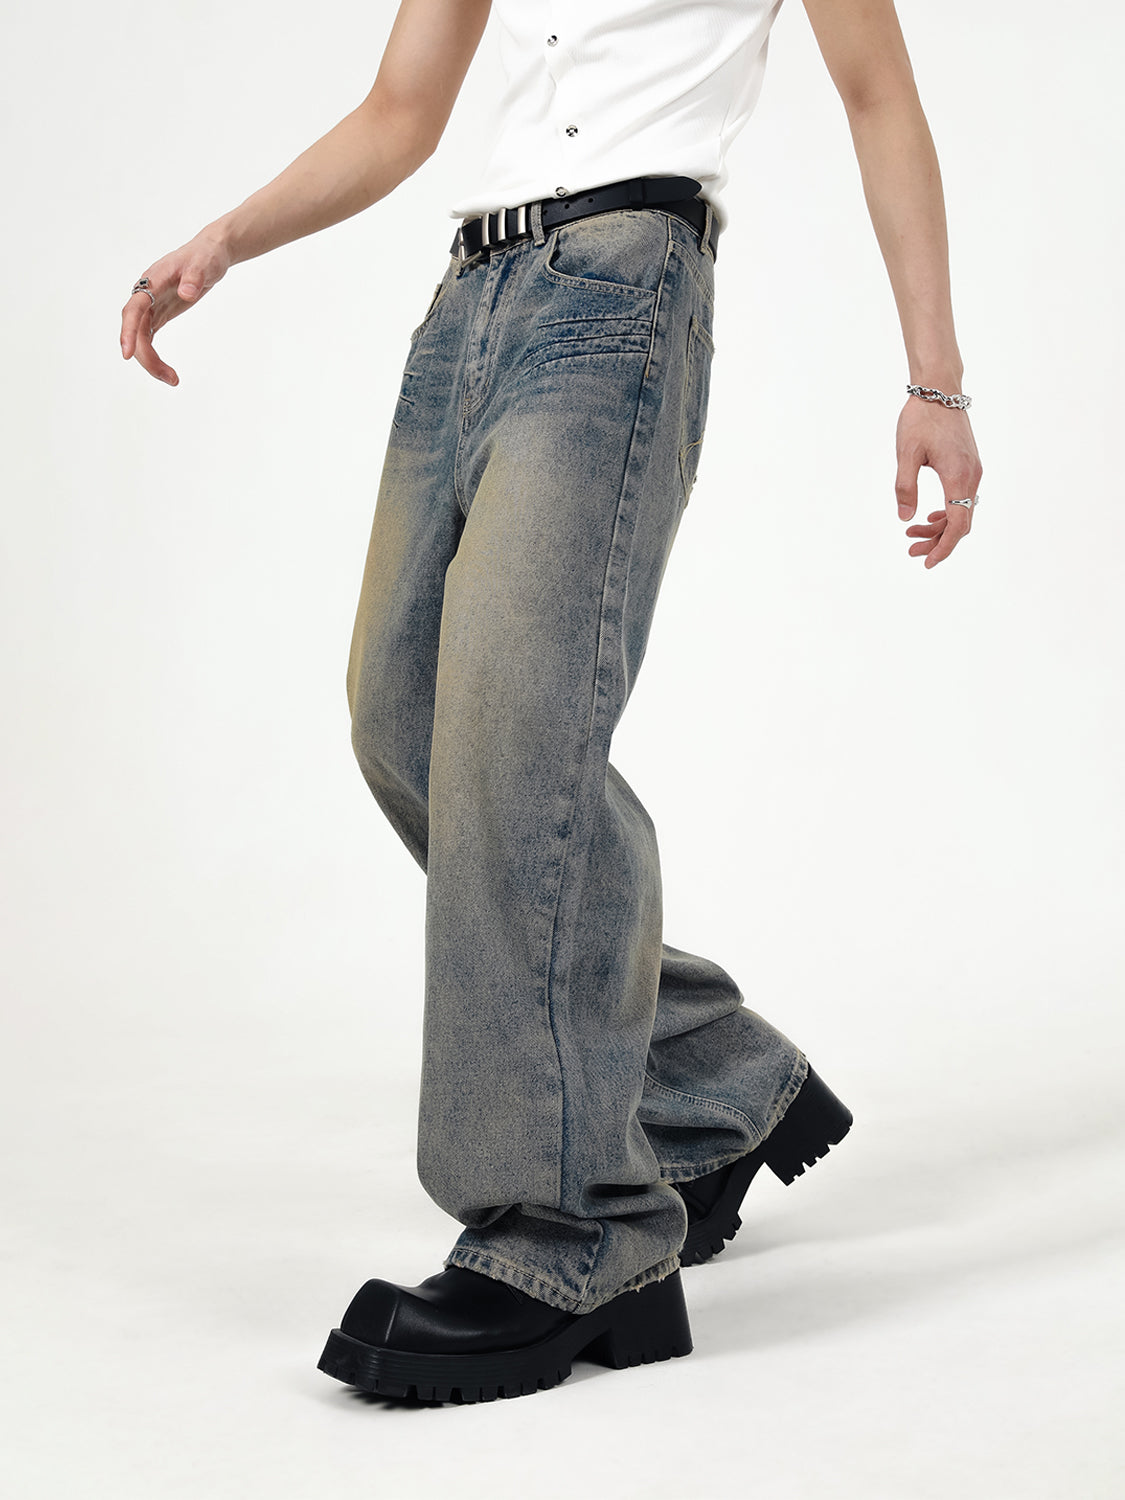 【23s July.】Vintage Straight Jeans